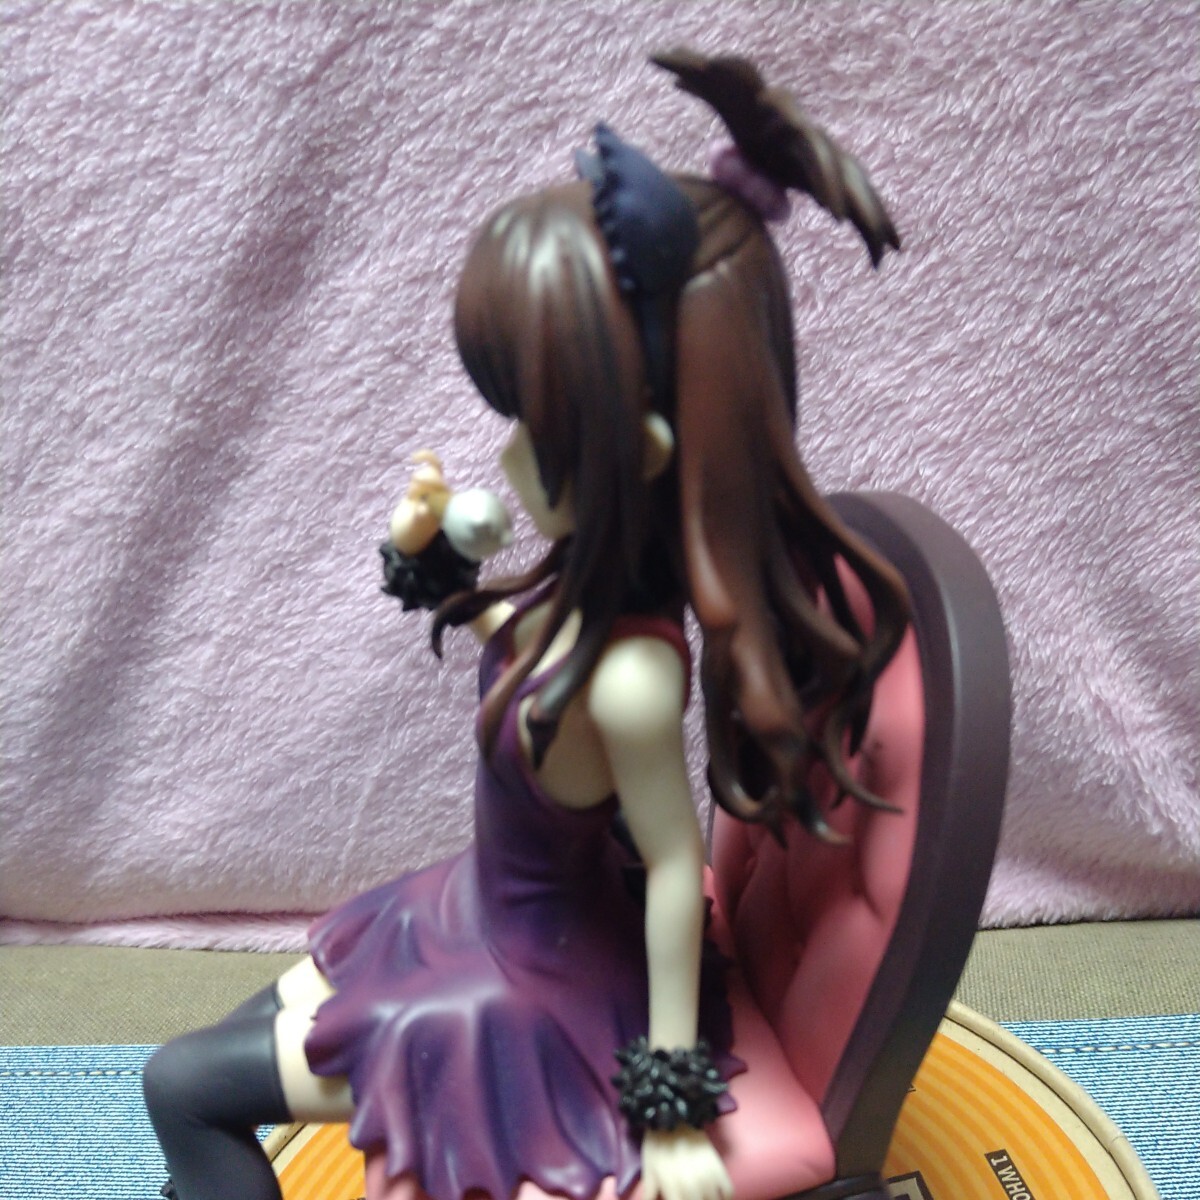  Cara aniTo LOVE.-....- dark nes. castle beautiful .1 7 figure * goods with special circumstances 